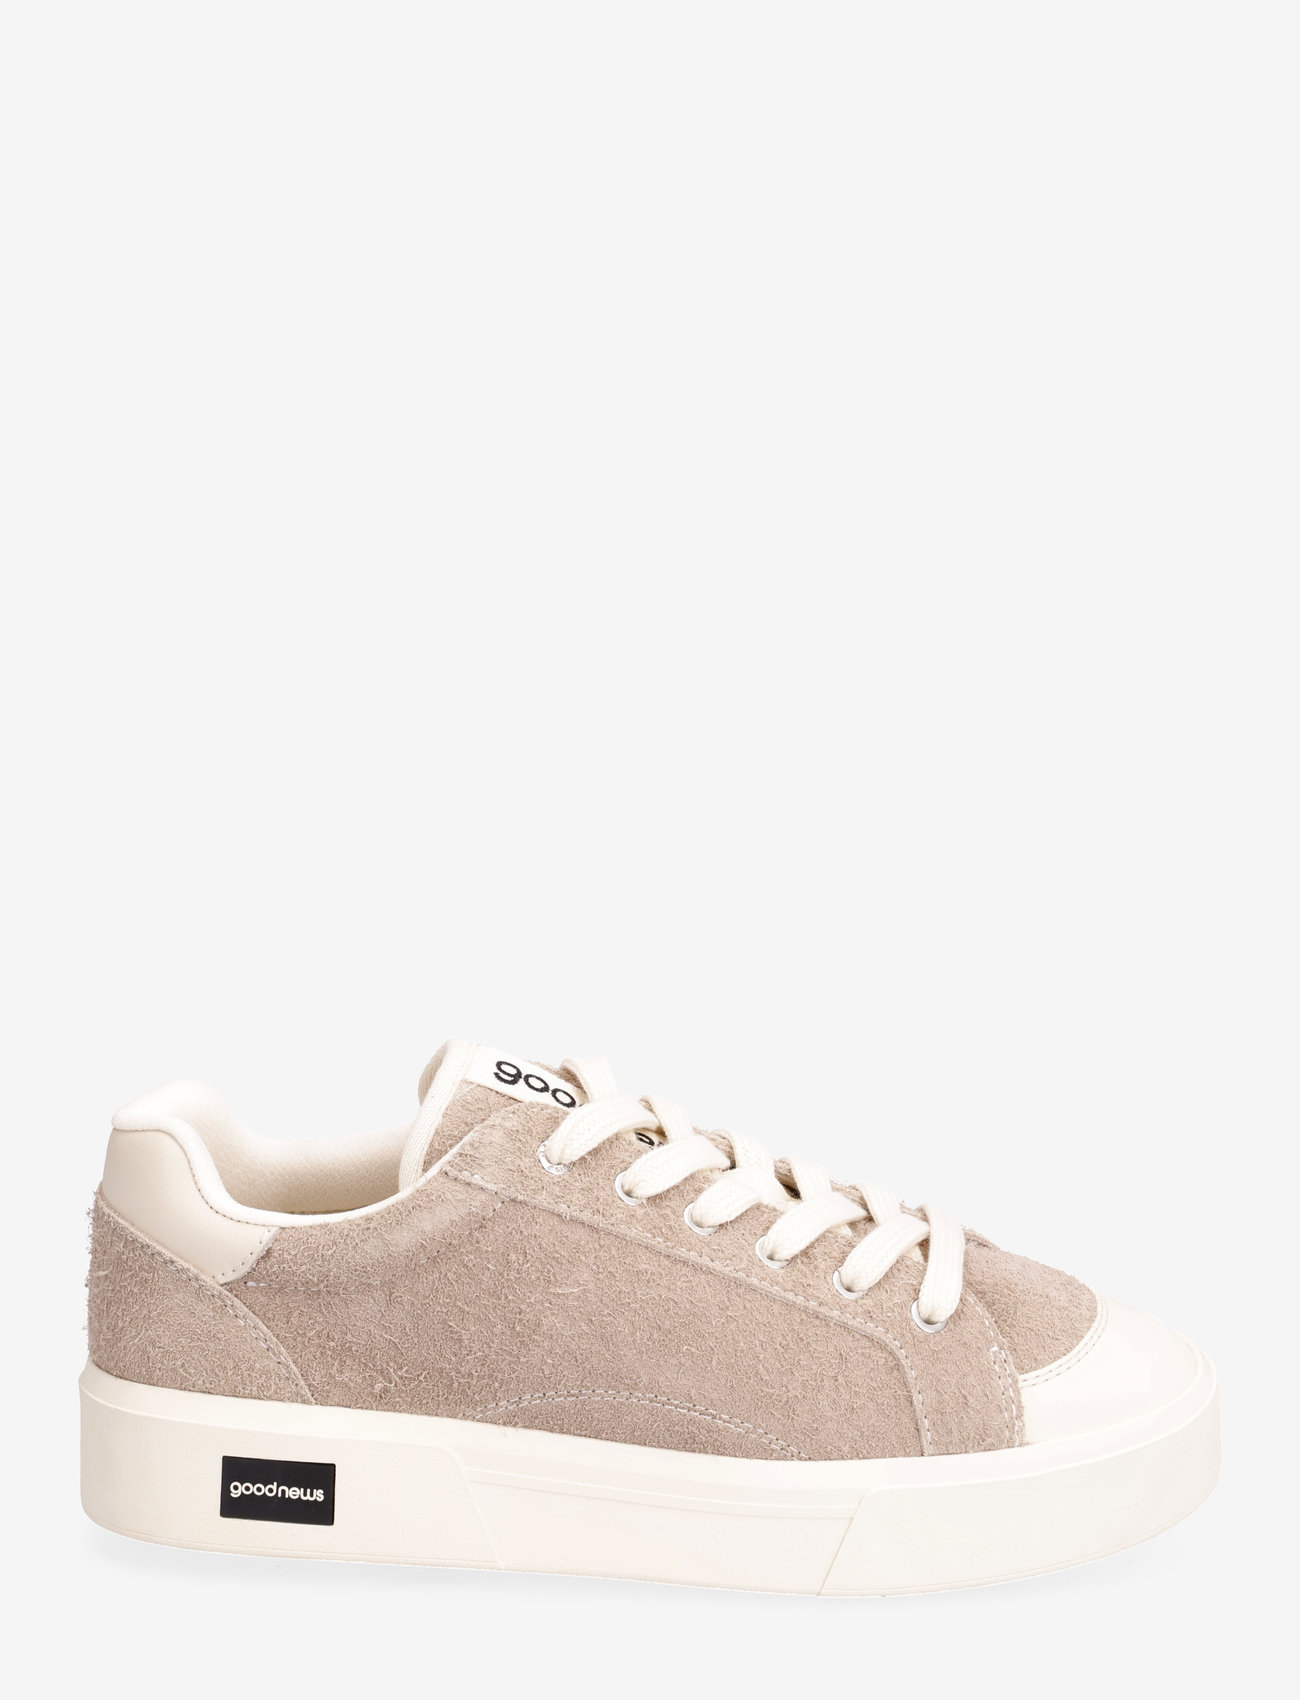 Good News - OPAL - lave sneakers - taupe - 1